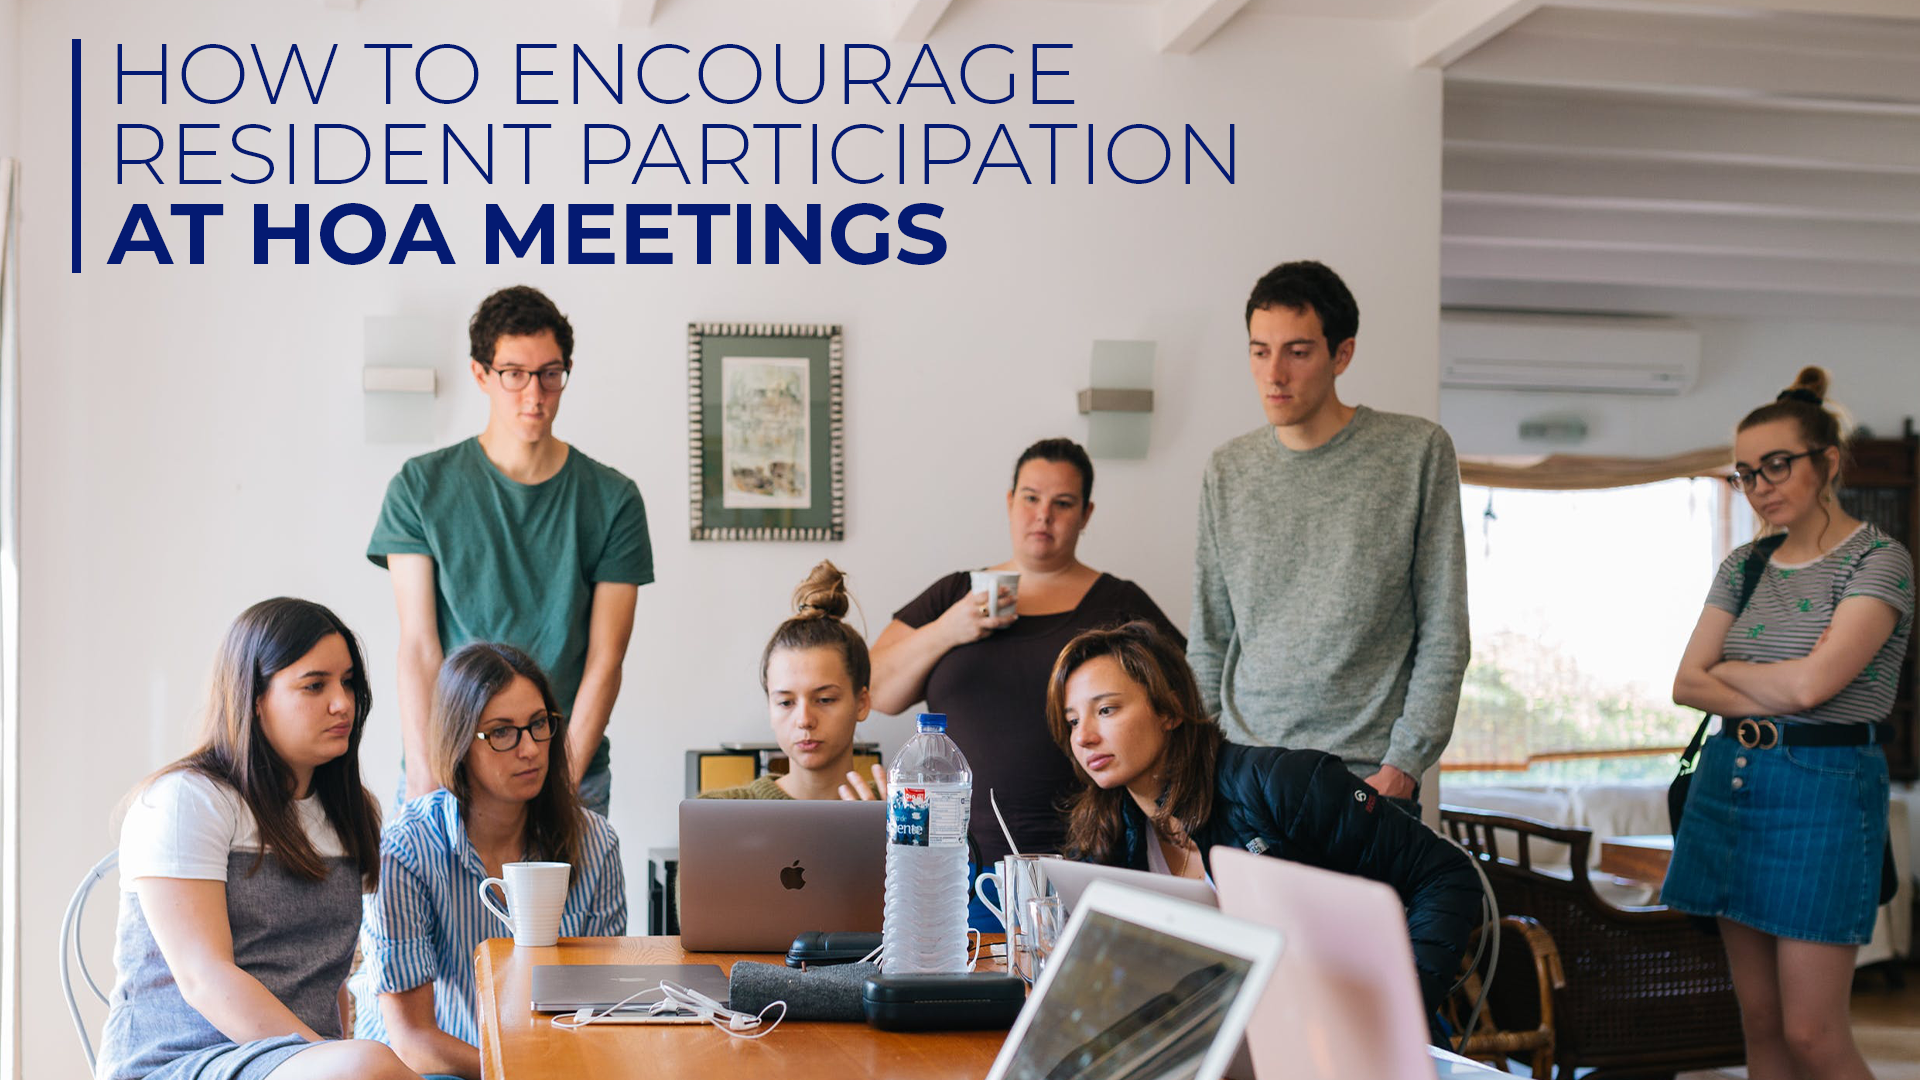 How to Encourage Resident Participation at HOA Meetings